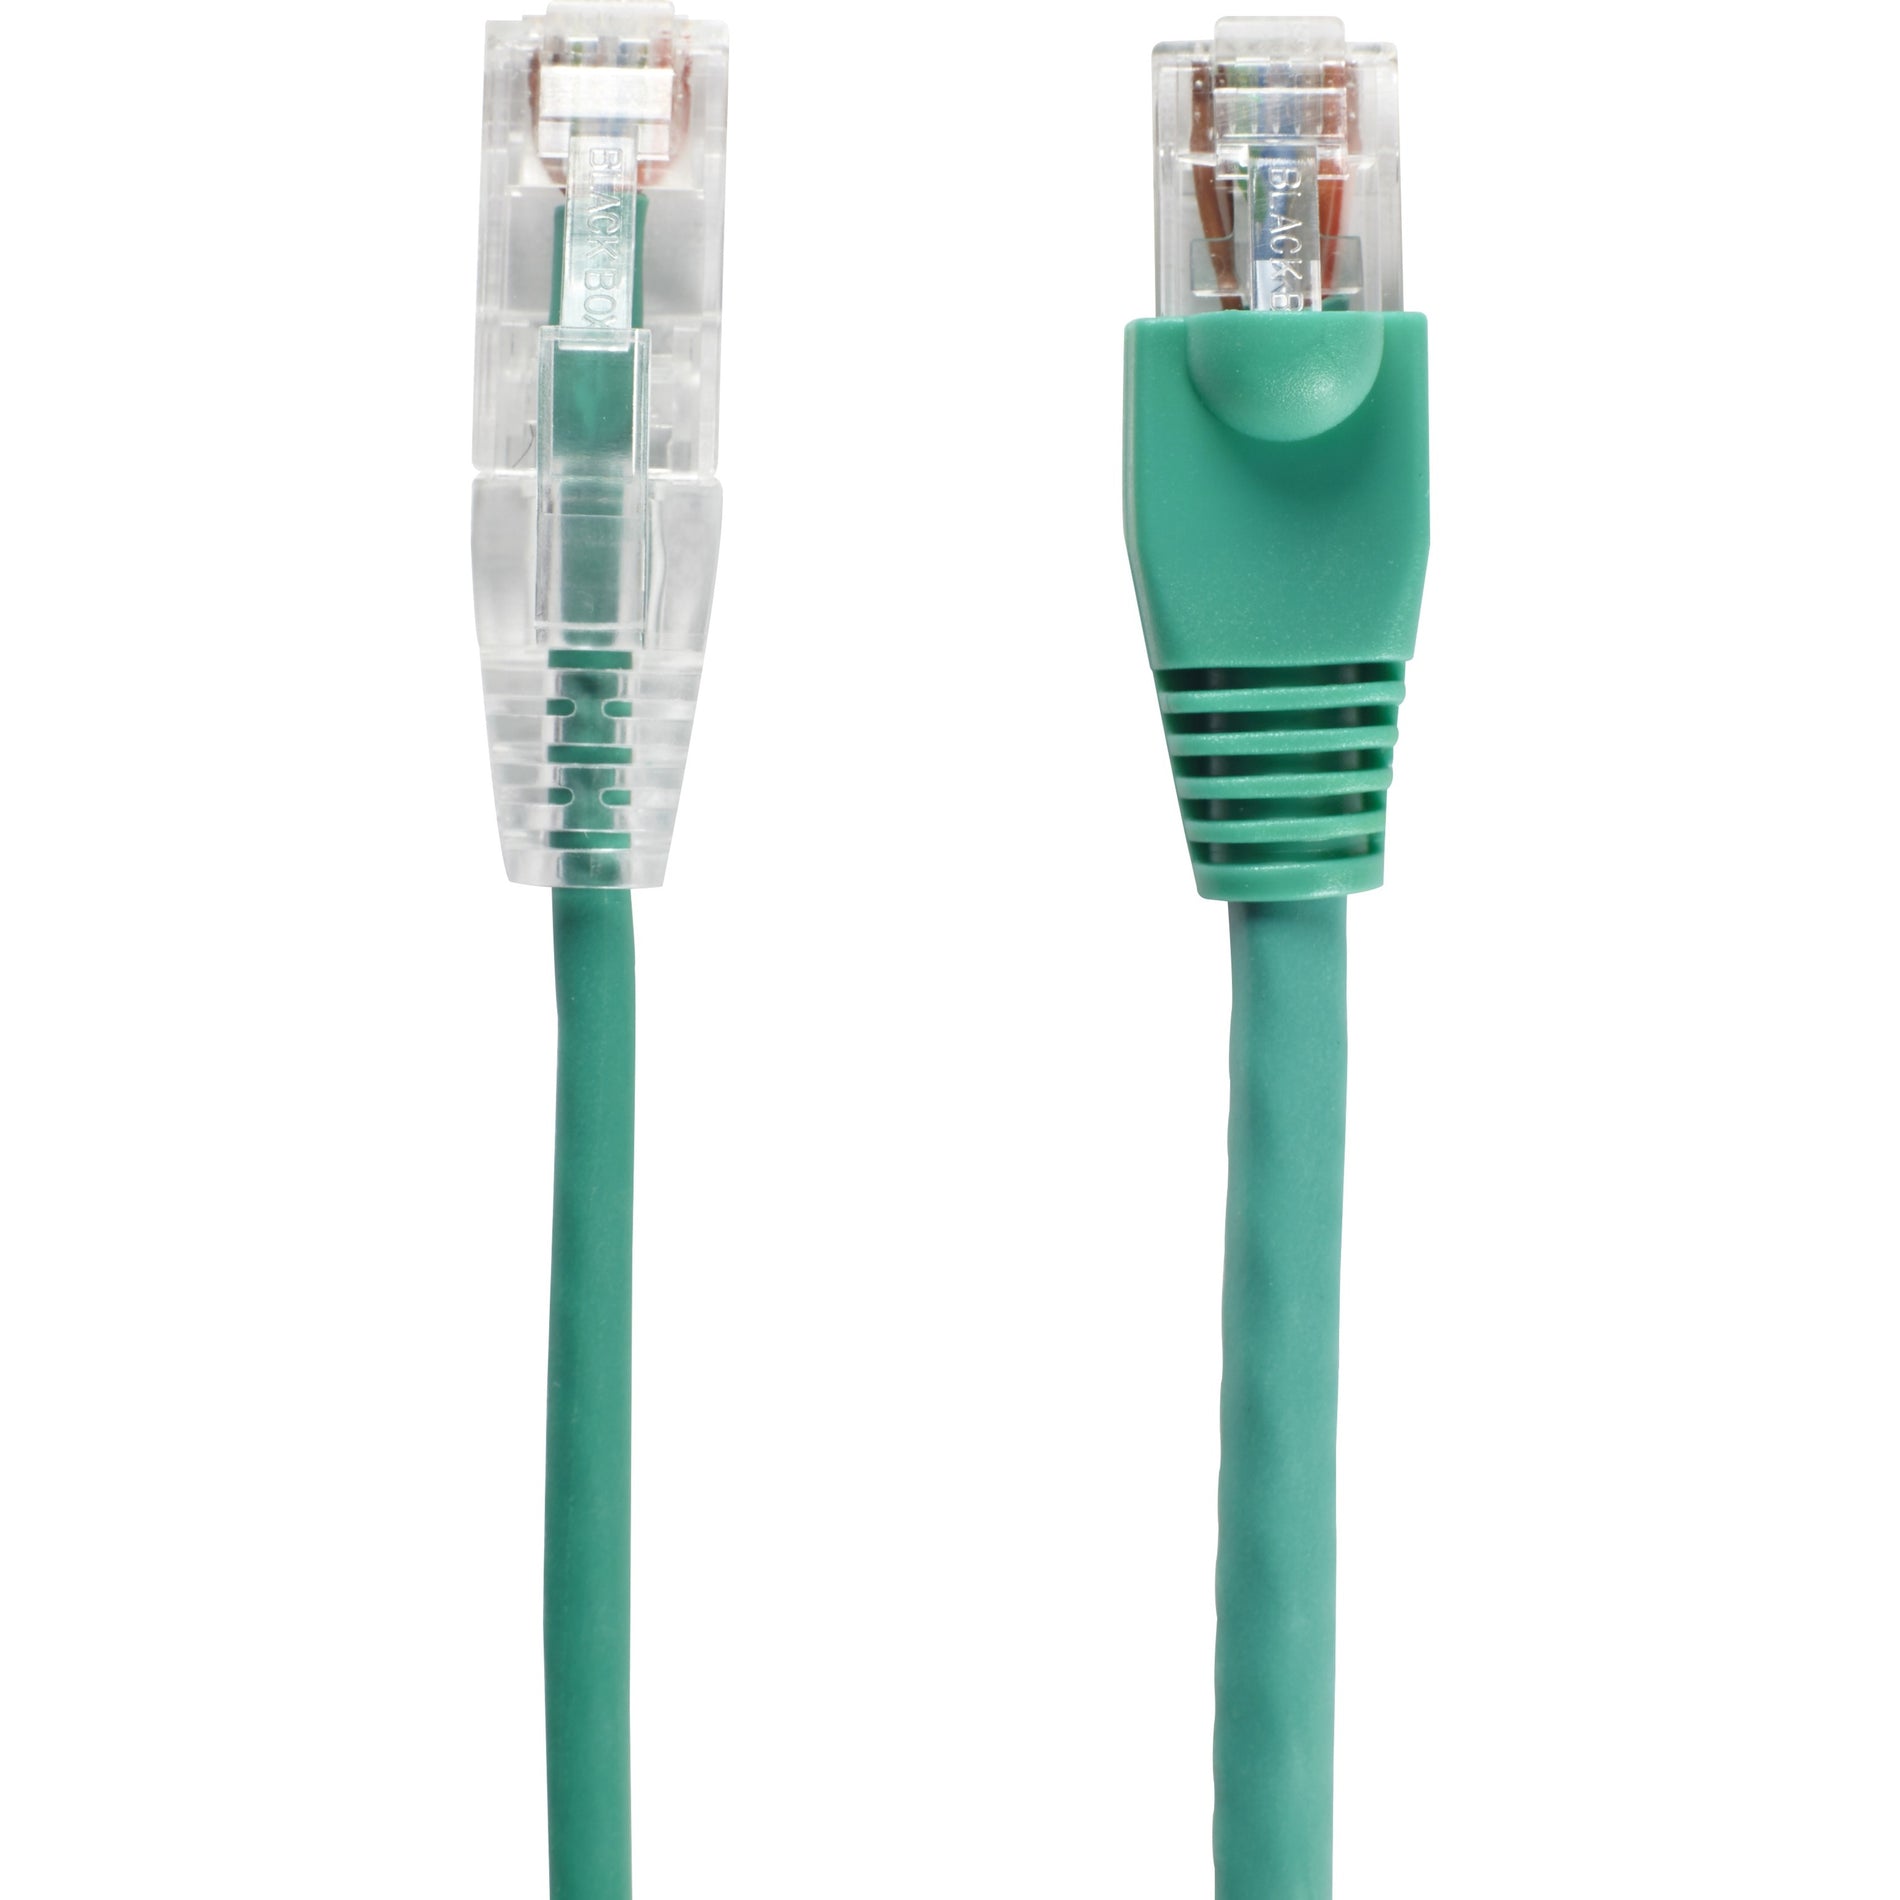 Black Box C6APC28-GN-04 Slim-Net Cat.6a UTP Patch Network Cable, 4 ft, Green